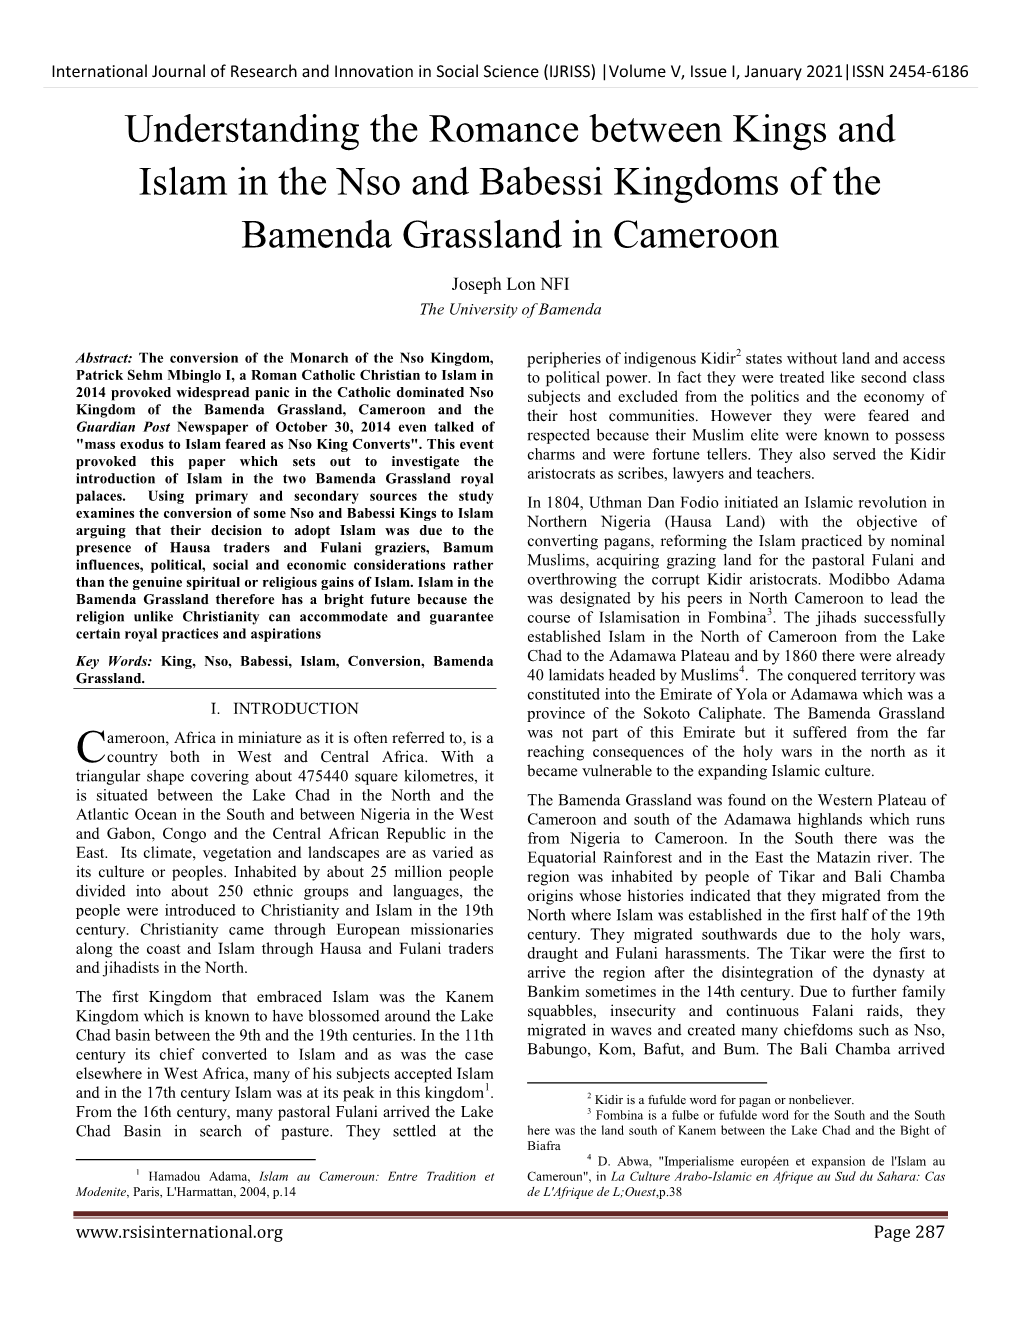 Understanding the Romance Between Kings and Islam in the Nso and Babessi Kingdoms of the Bamenda Grassland in Cameroon